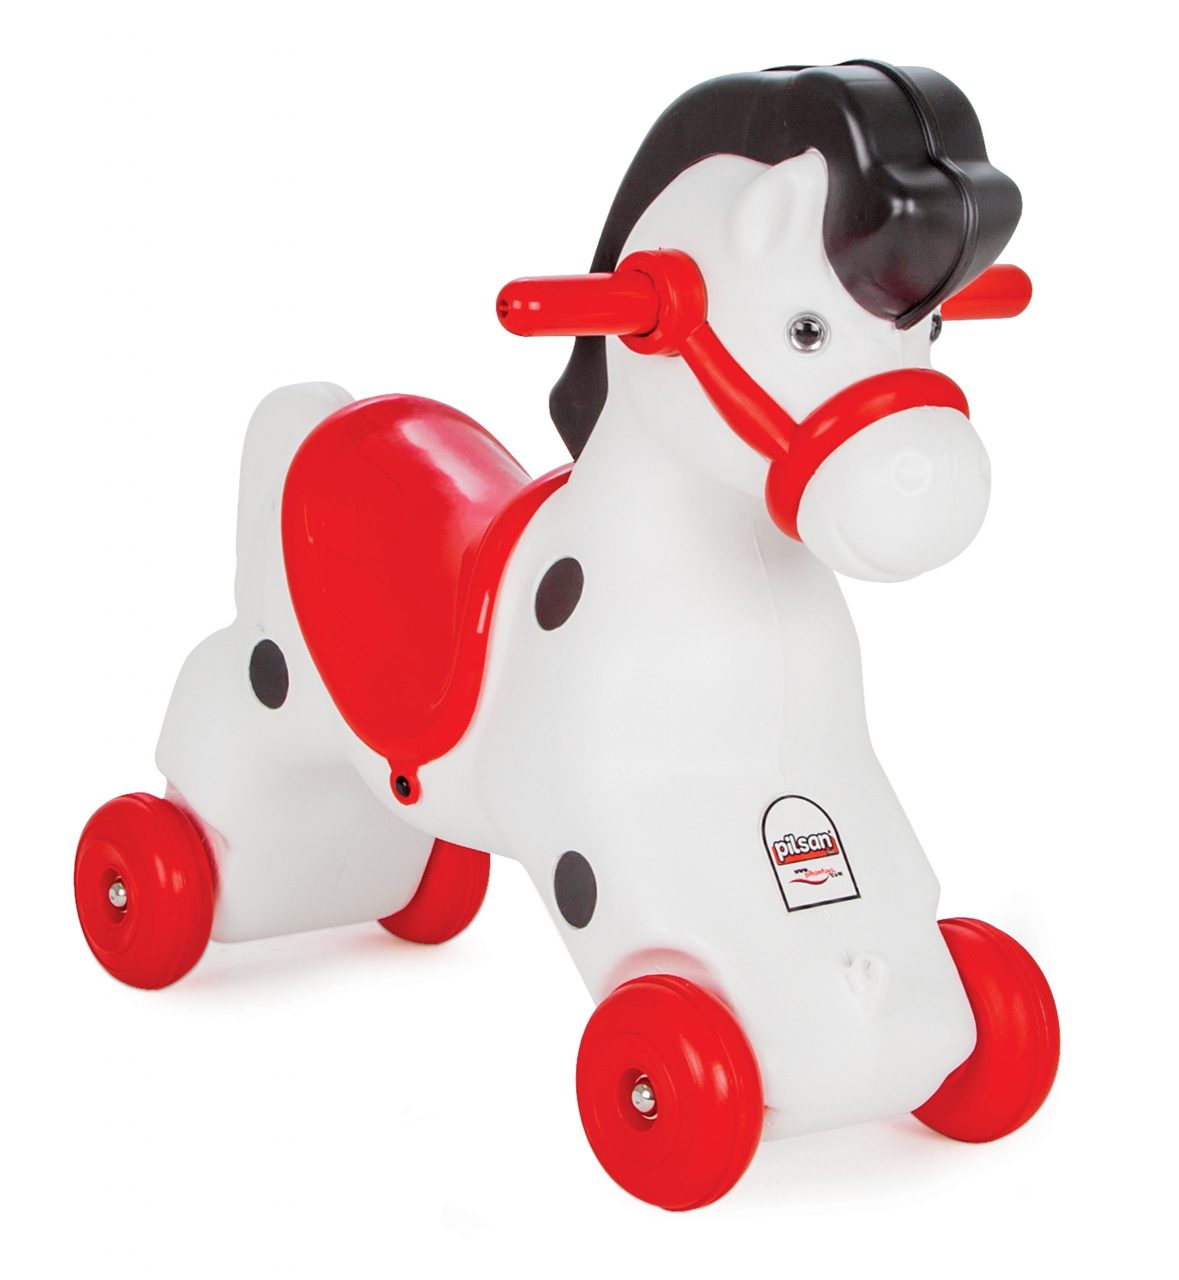 Musical Rocking Horse 2 in 1 Rocker and Foot to Floor Ride on 1